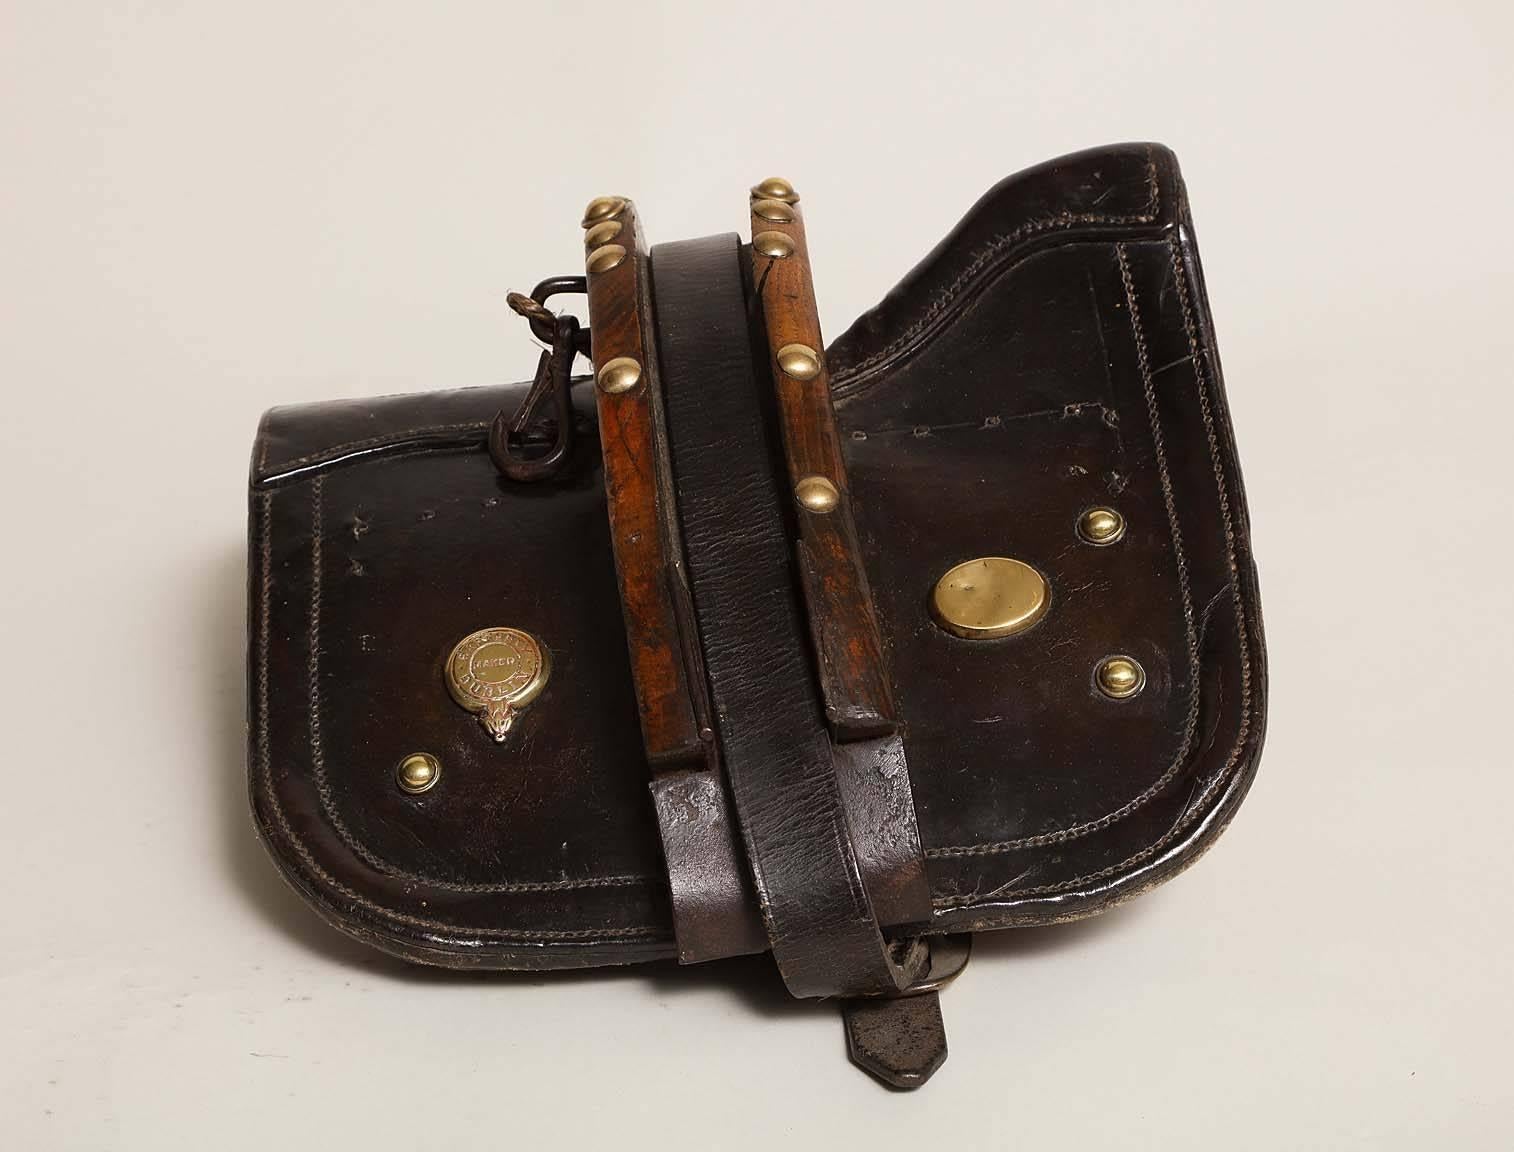 Unusual Irish 19th century specialty pony saddle with center harness by Rafferty of Dublin, in richly patinated leather, brass and timber and with padded ticking to the underside.